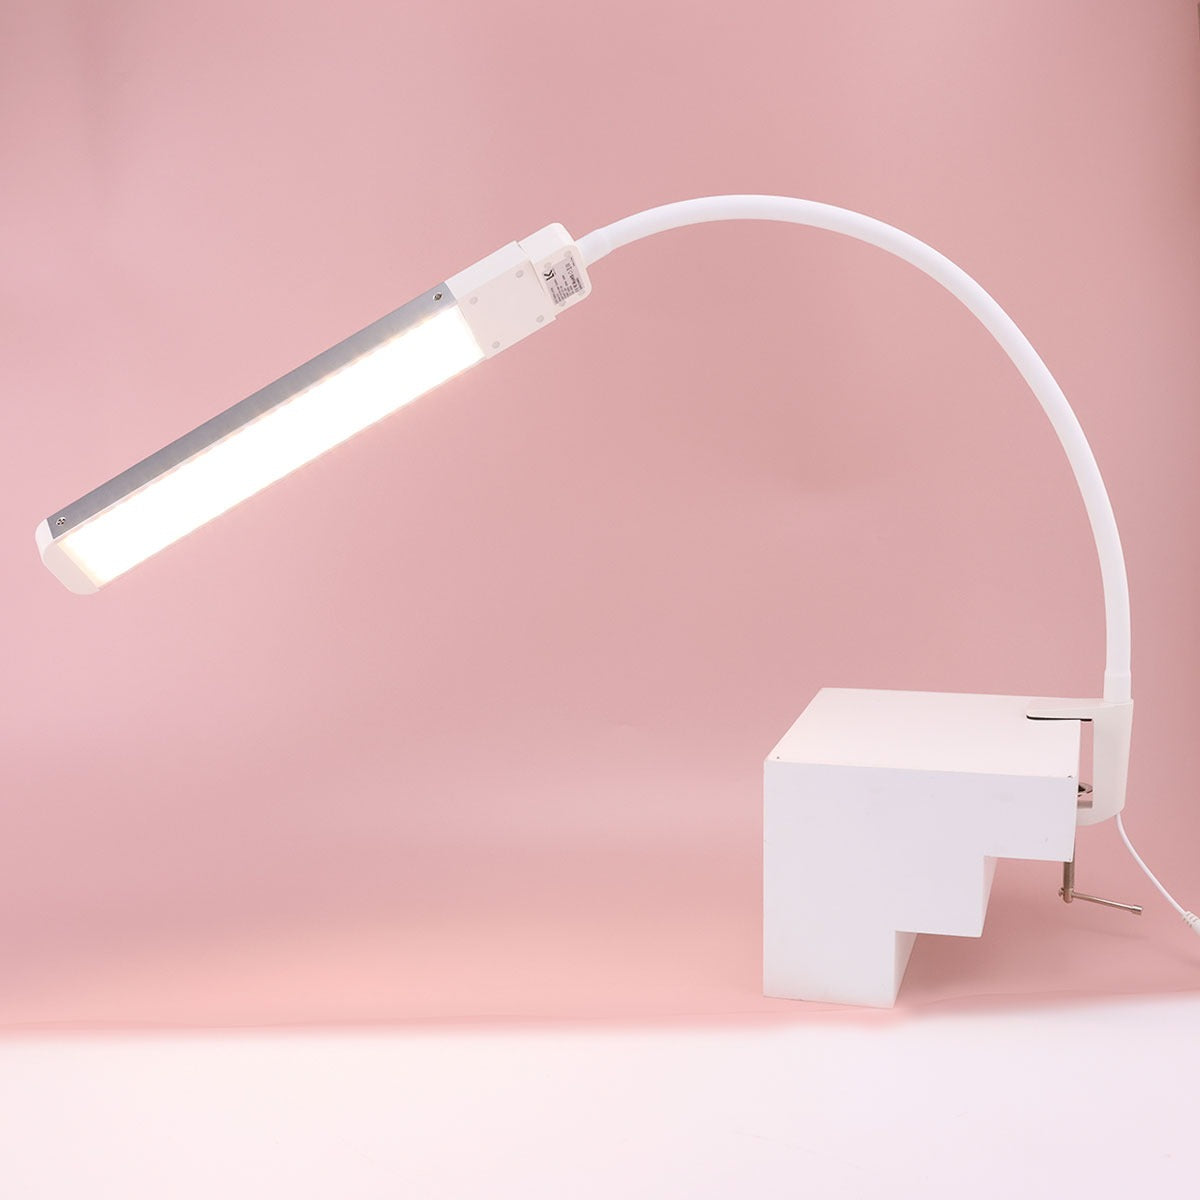 Table Lamp for beauty experts.